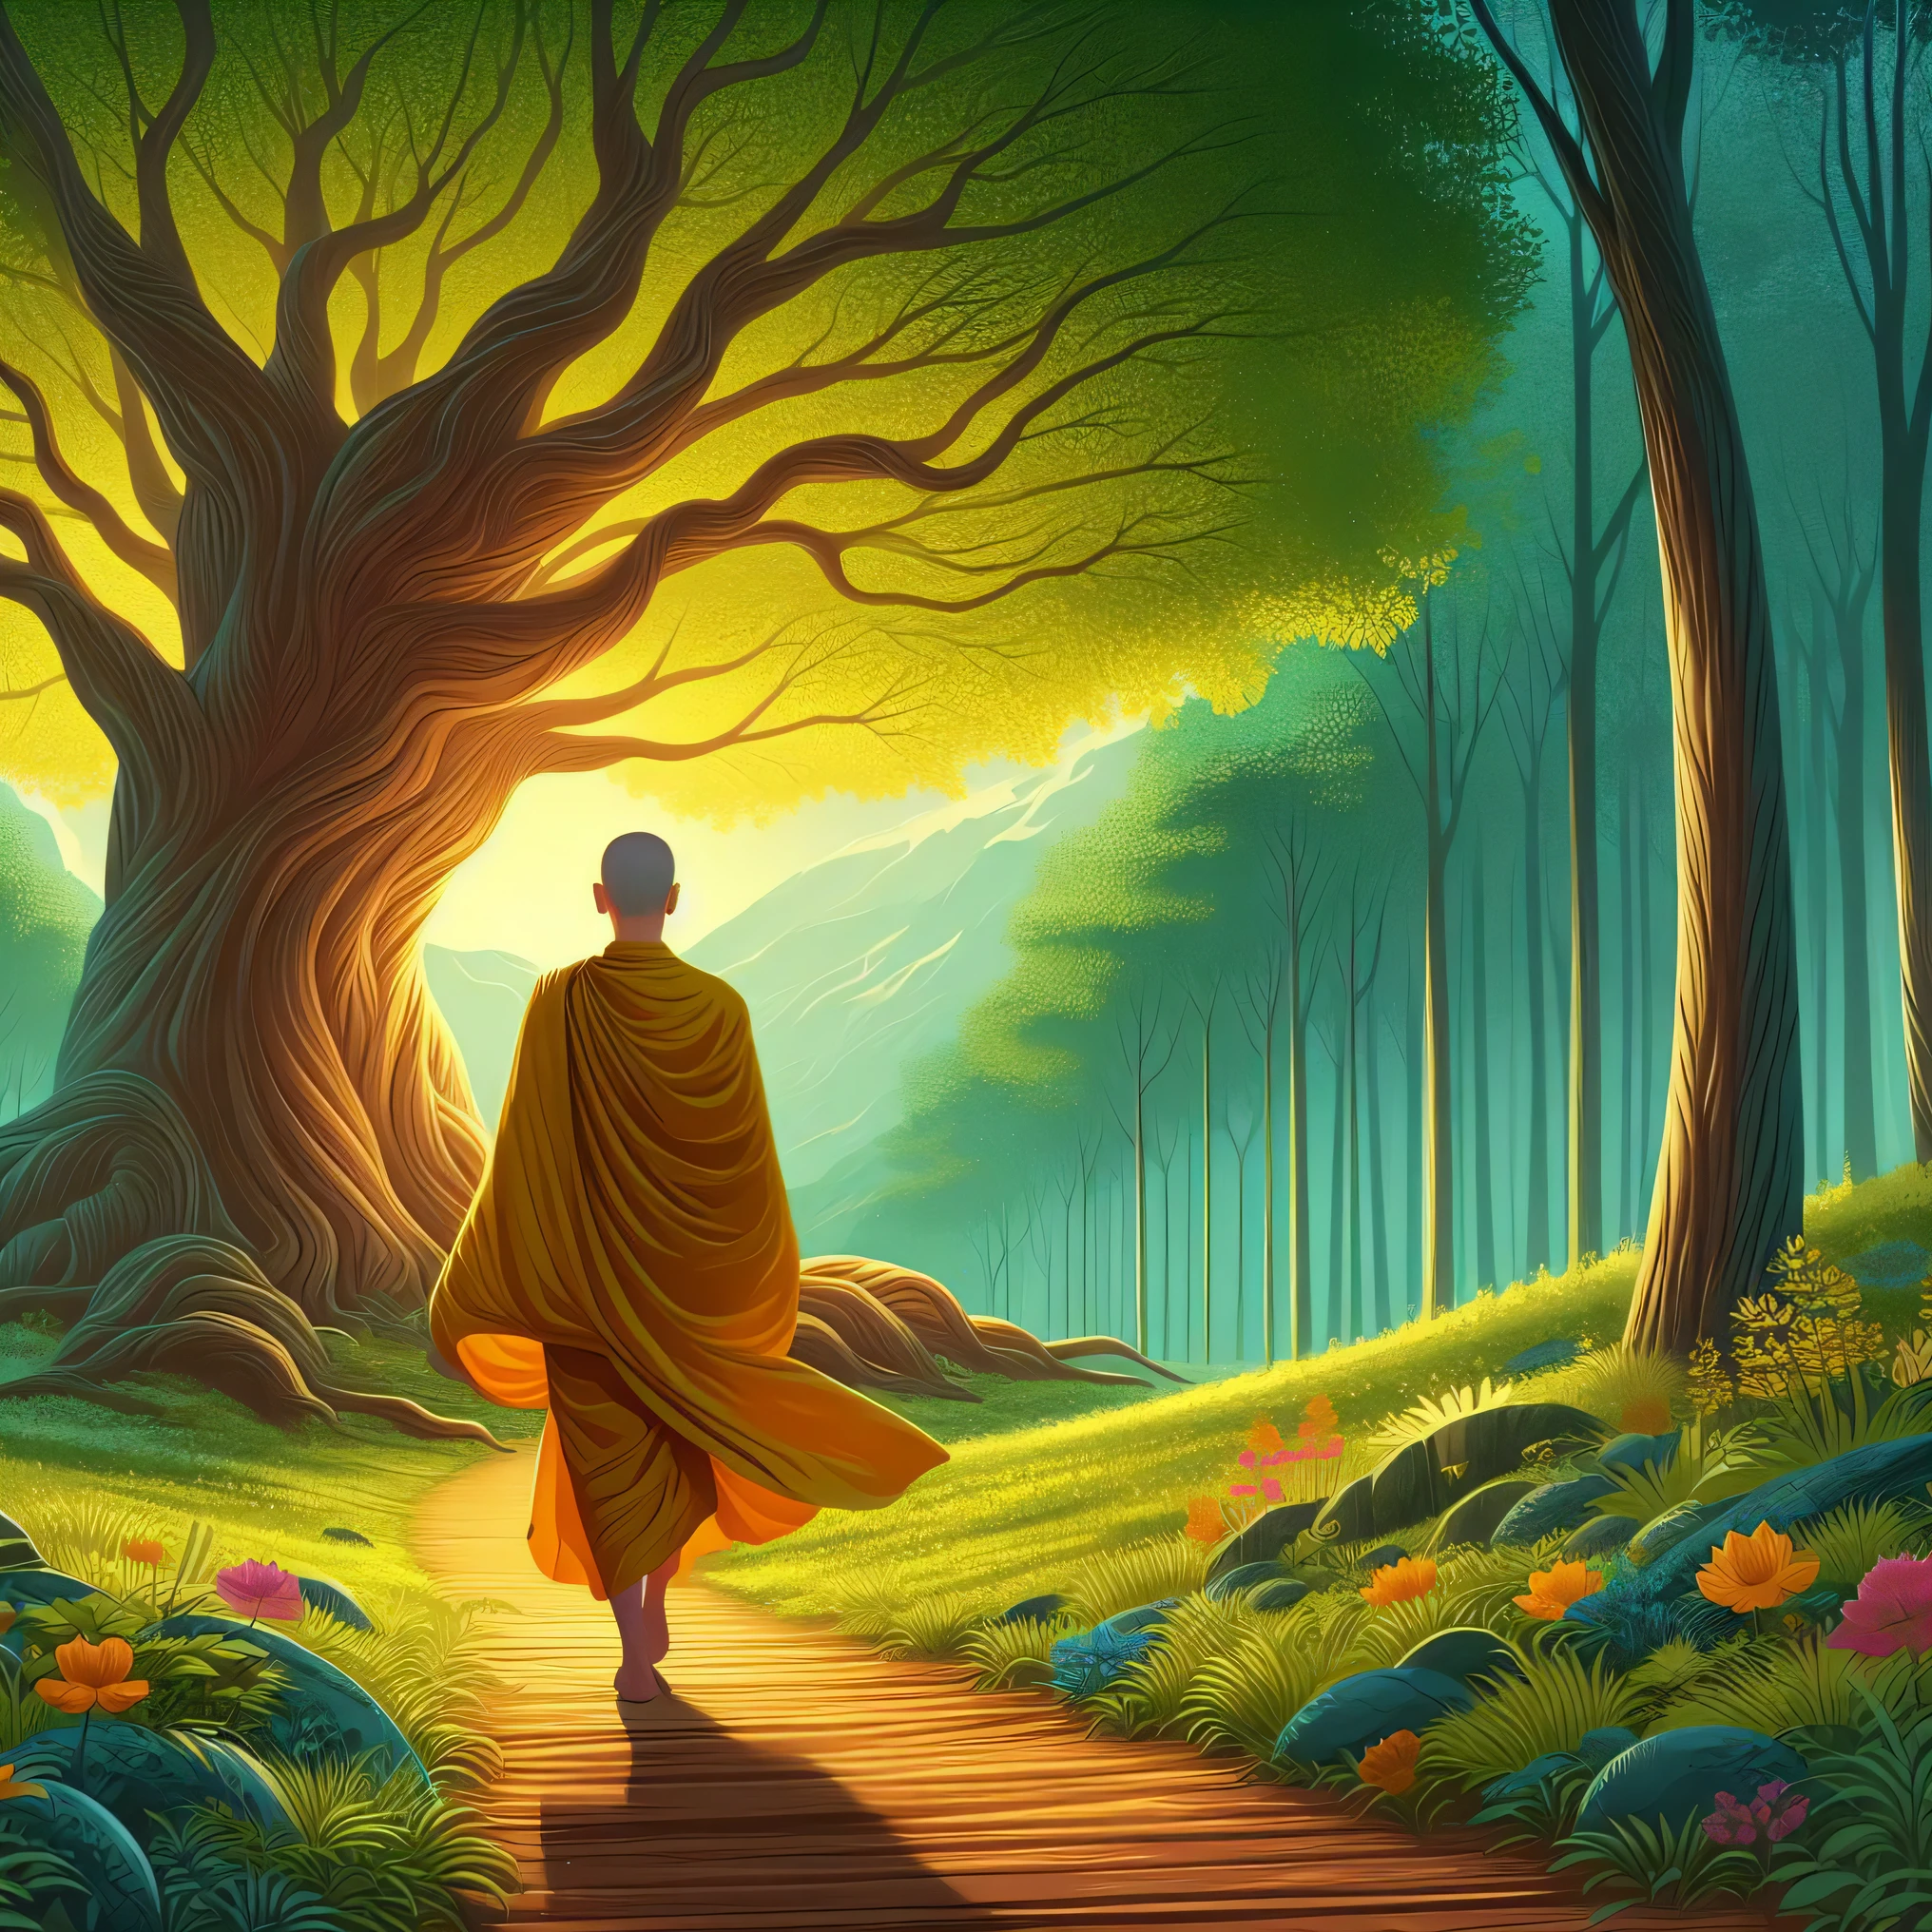 a man in a yellow robe walking down a path through a forest, on path to enlightenment, on the path to enlightenment, monk meditate, buddhism, an ancient path, spiritual enlightenment, golden sacred tree, the bodhi tree at sunset, buddhist, realm of life, monk, the journey of life, buddhist monk, blossoming path to heaven, serene illustration